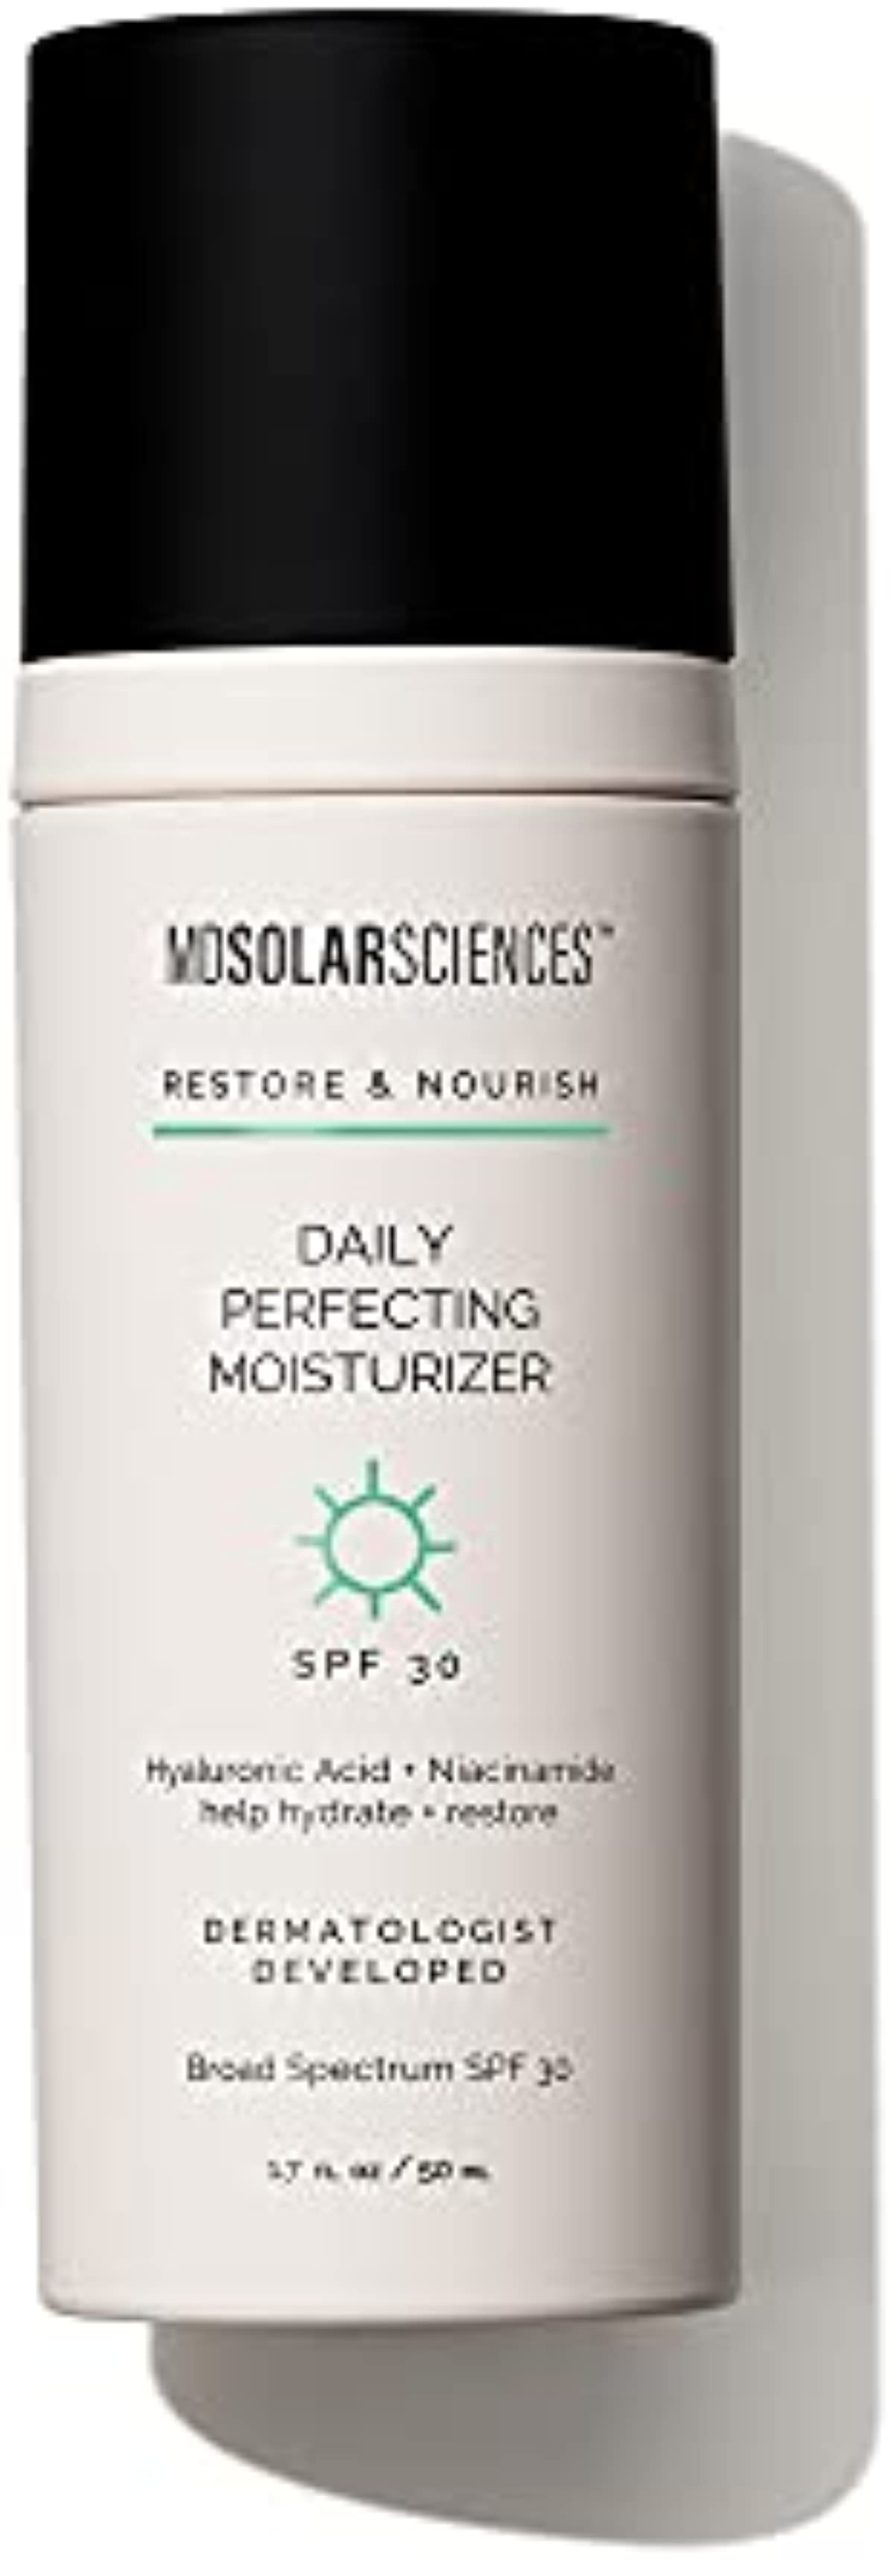 MDSolarSciences Daily Anti-Aging Moisturizer SPF 30, 2-in-1 Face Moisturizer and Sunscreen Hydrates and Perfects Skin with Hyaluronic Acid and Broad Spectrum Protection